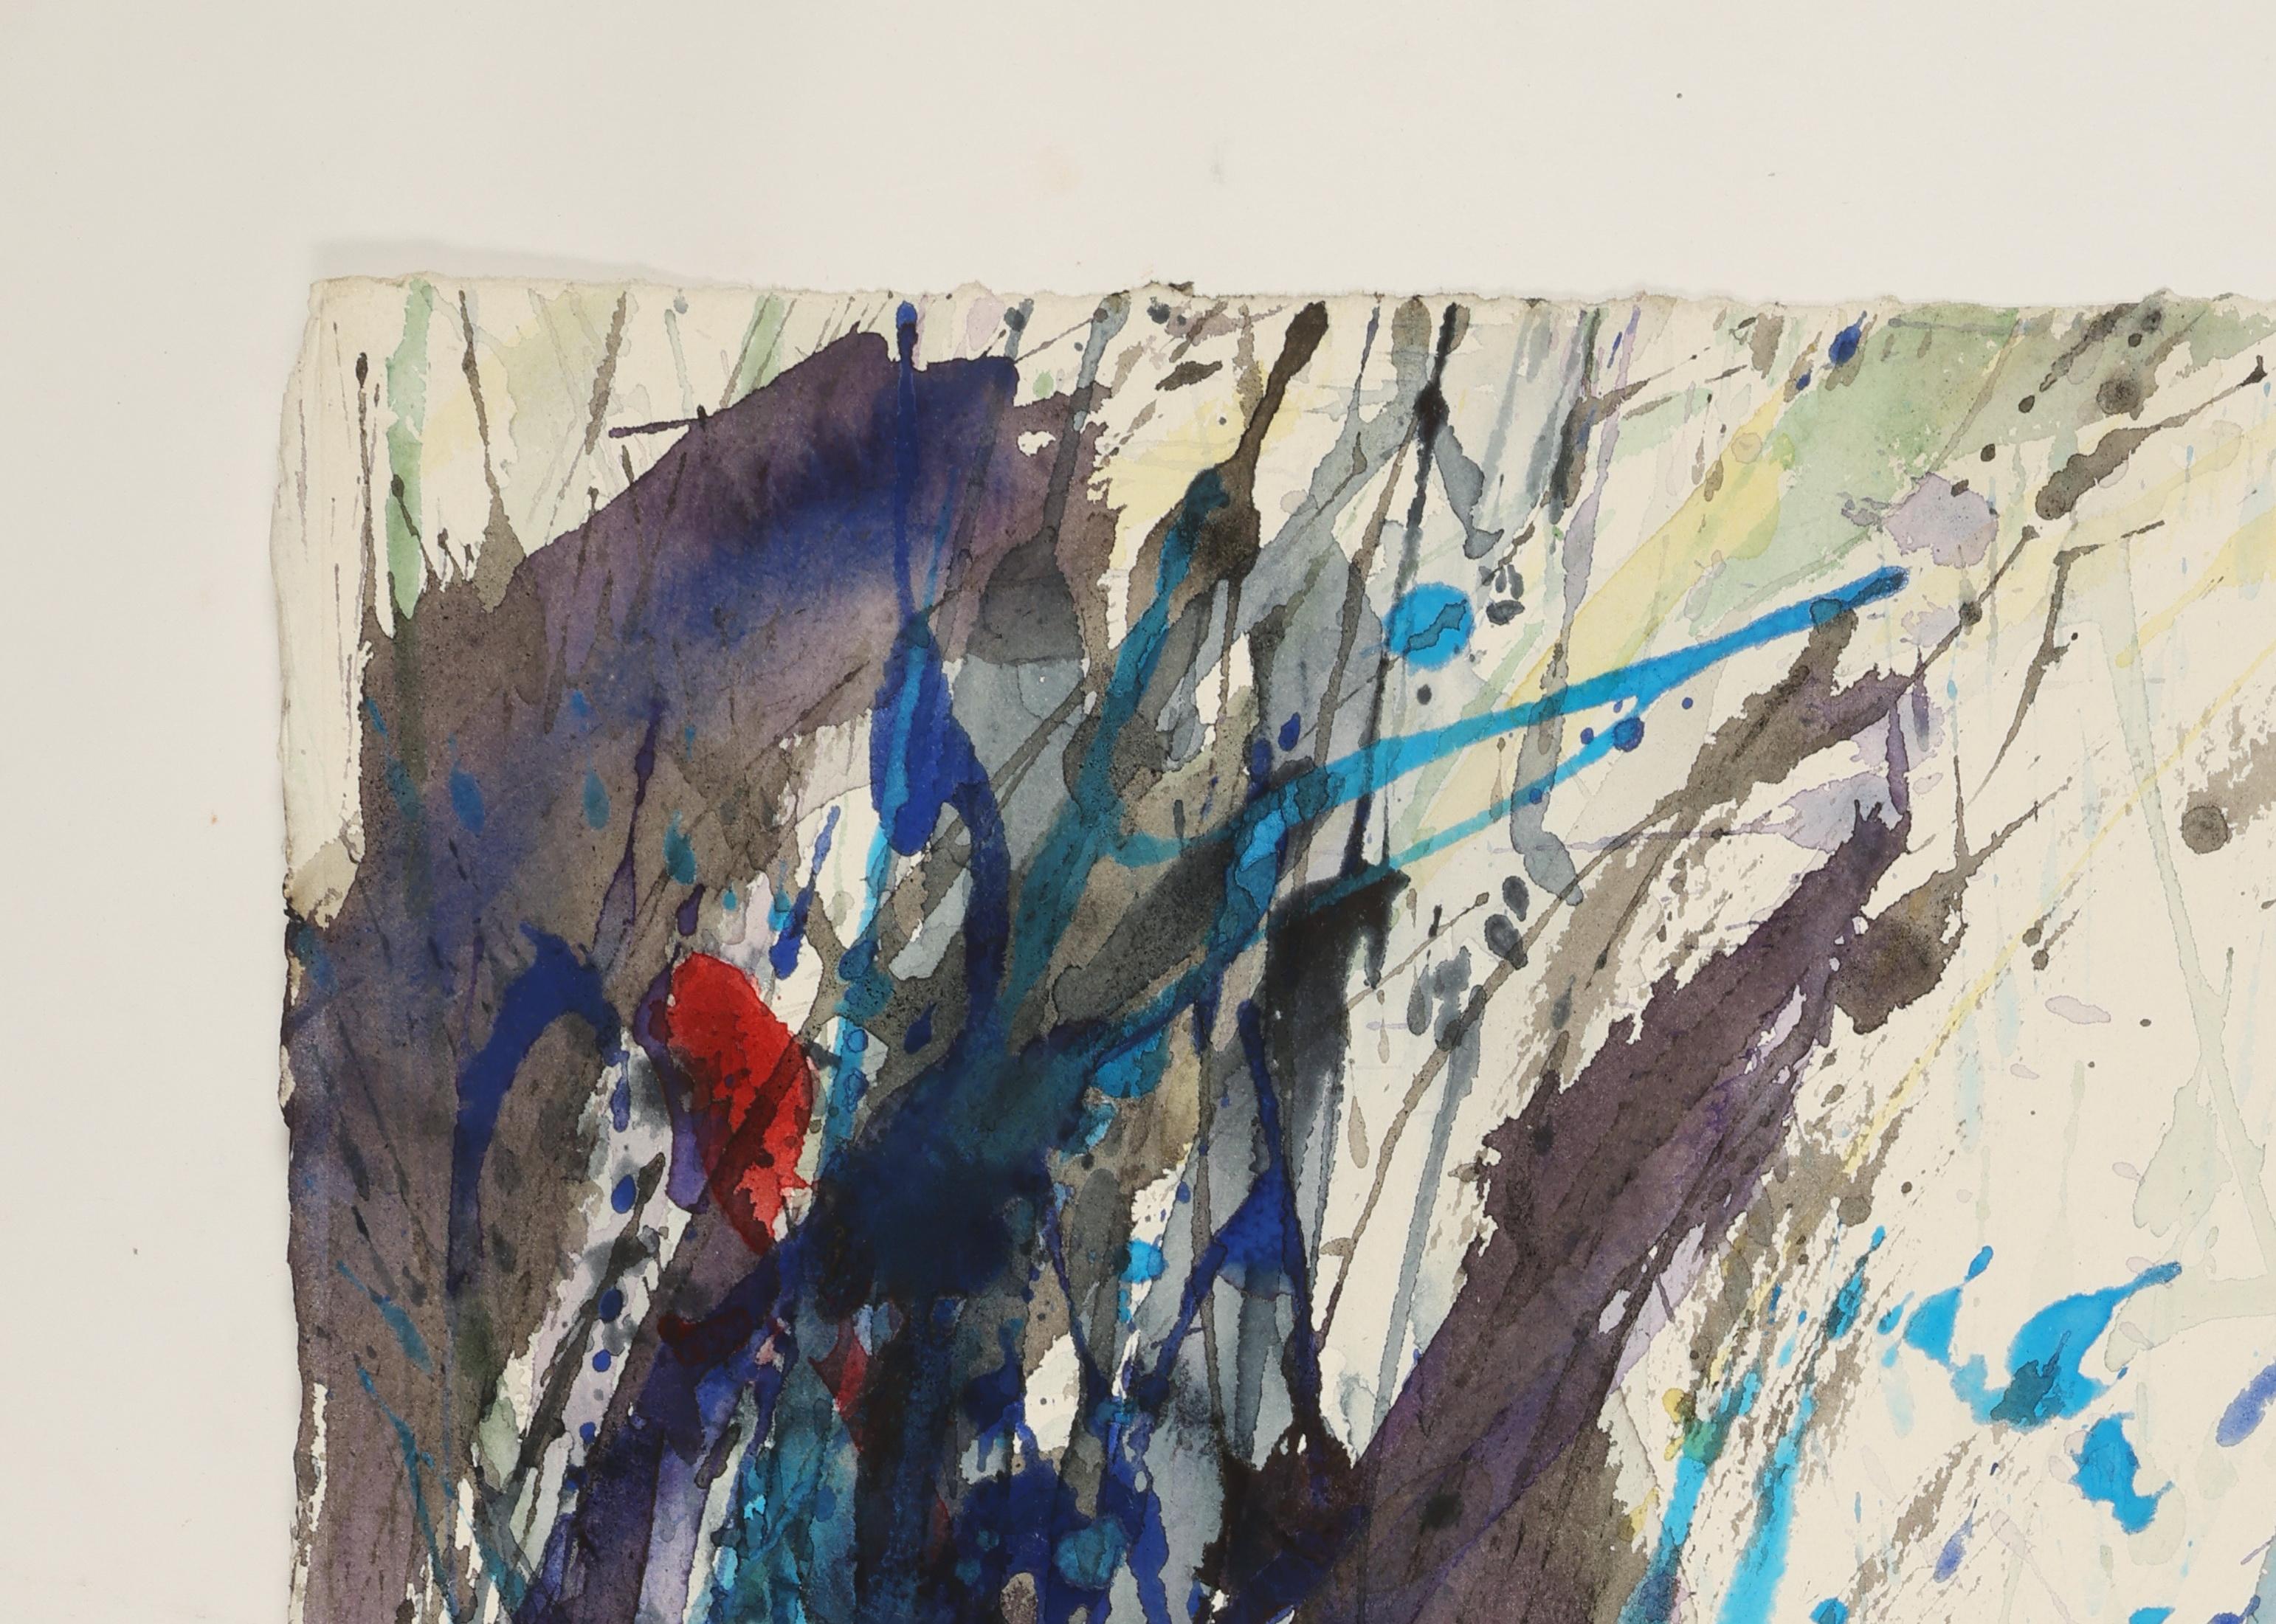 Abstract Watercolor Painting, 'Design for Sculpture', C. 1995 by David Ruth For Sale 1